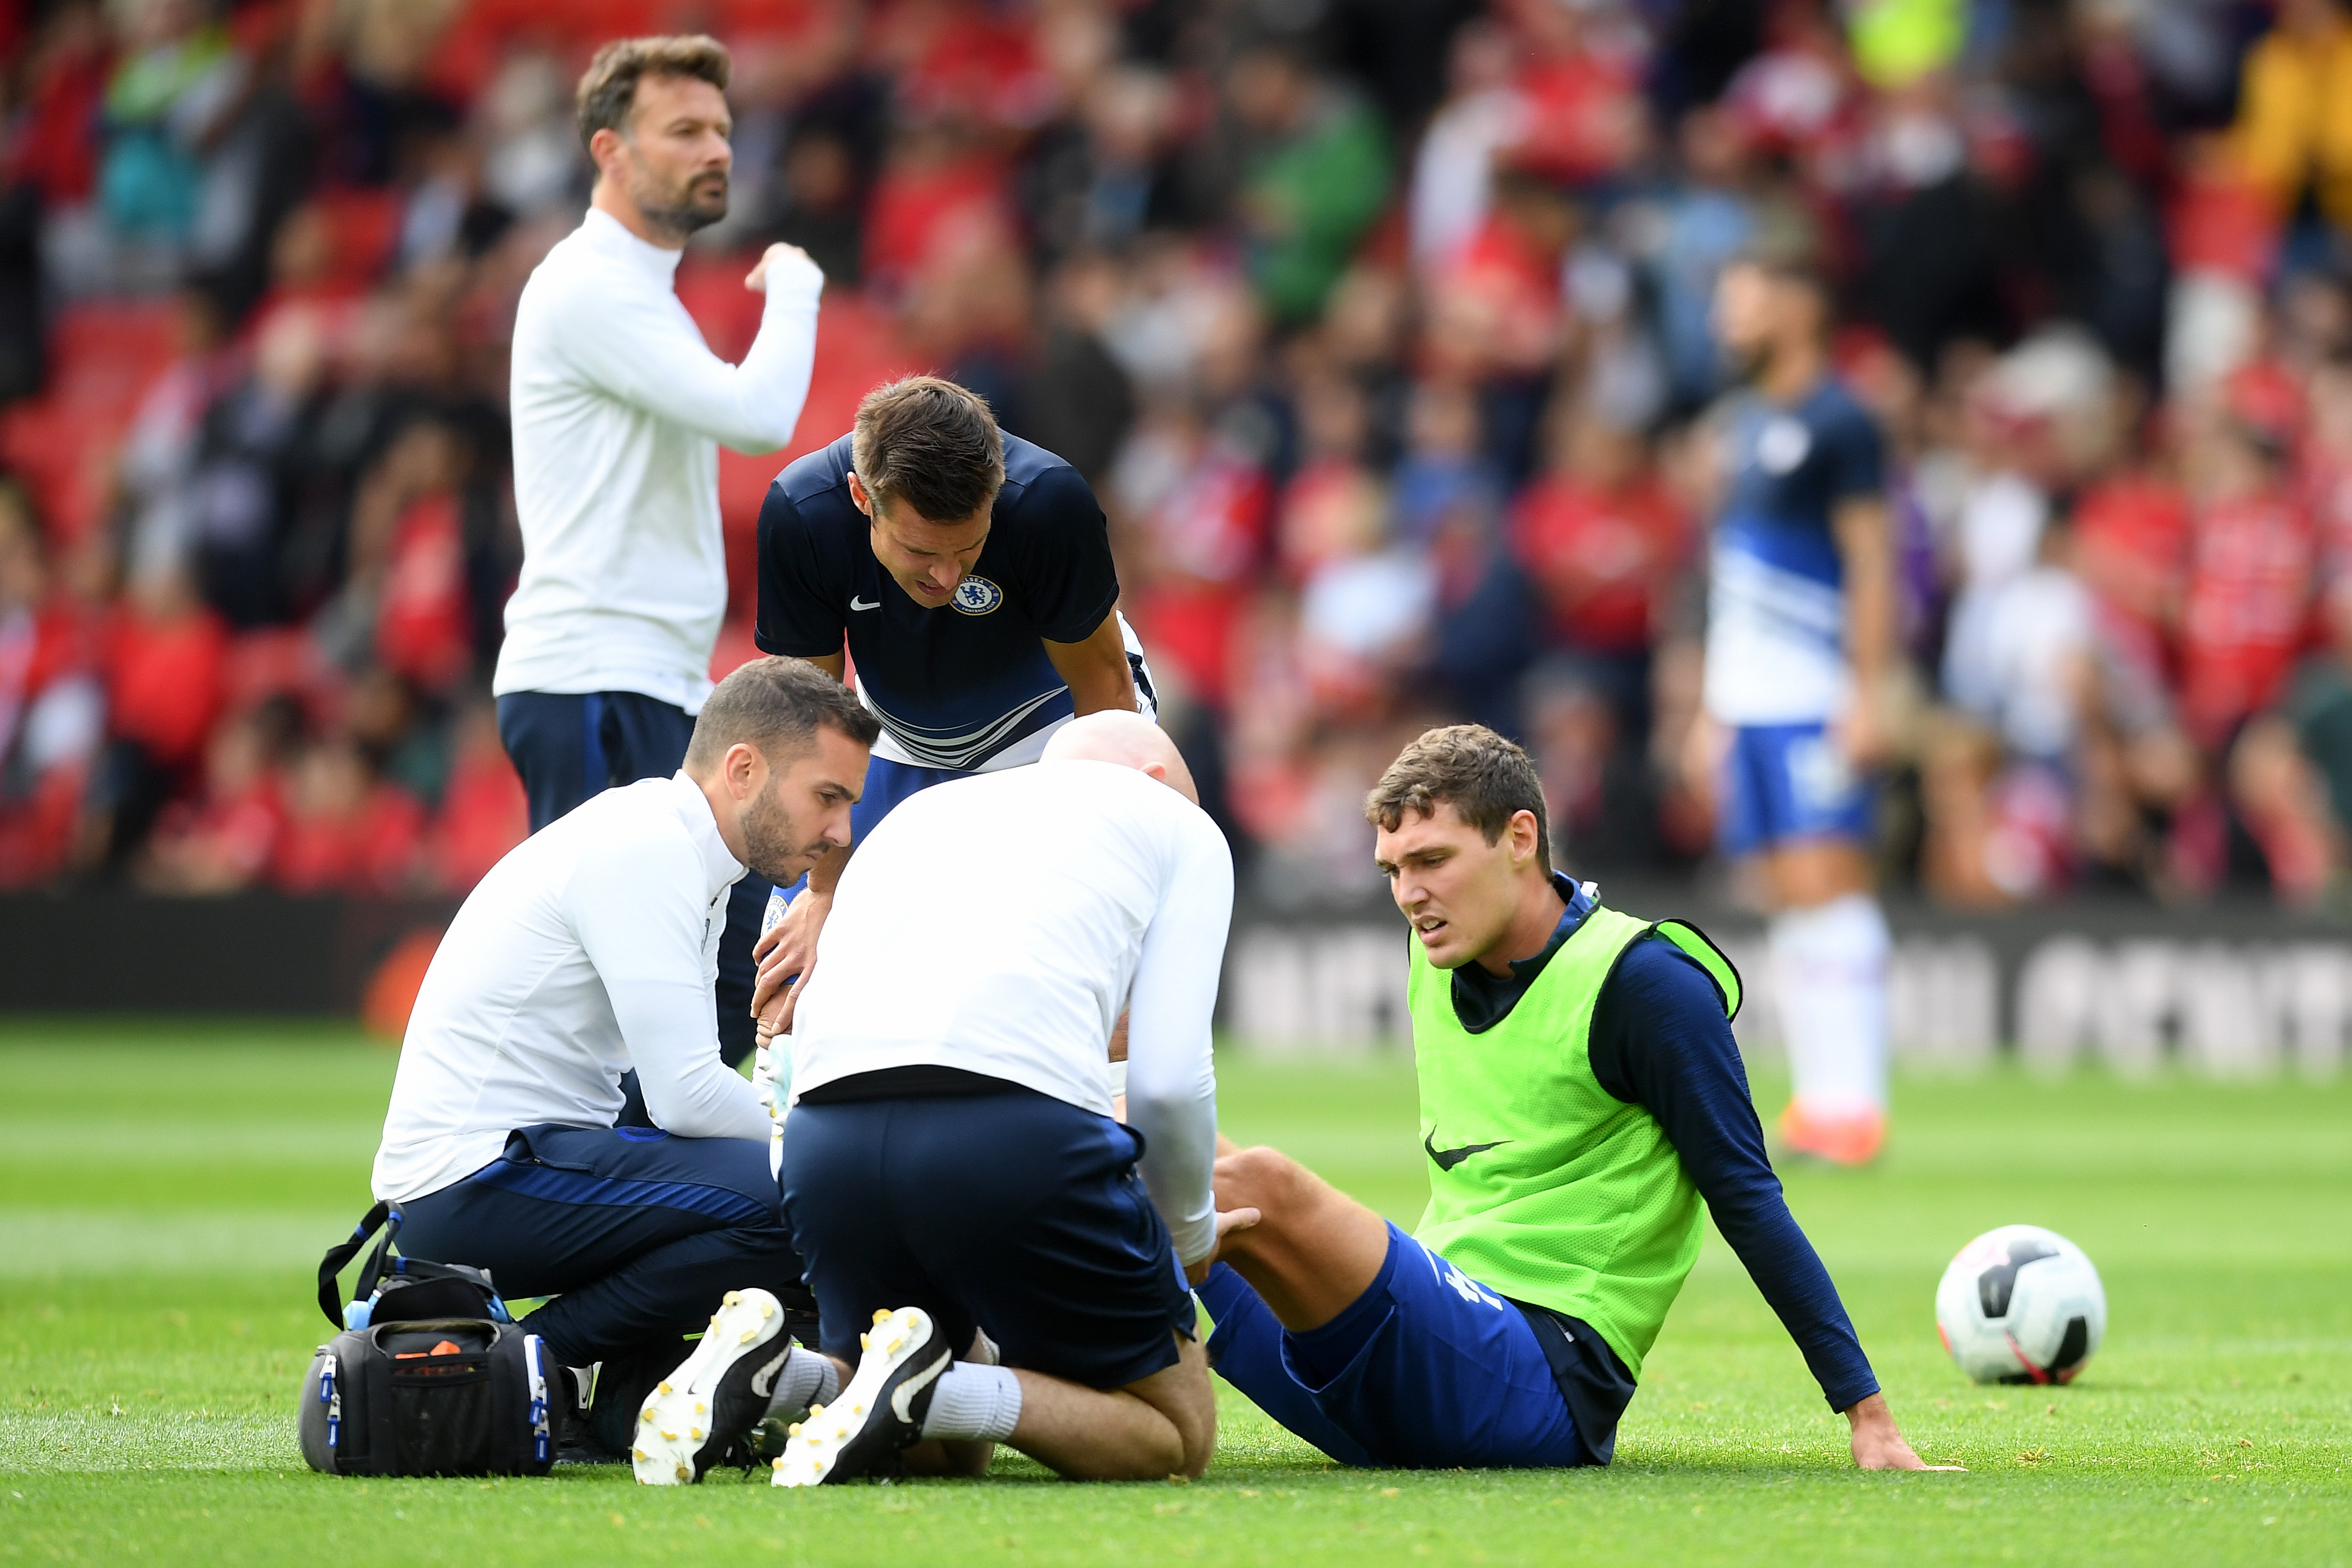 MANCHESTER, ENGLAND - AUGUST 11: Andreas Christensen of Chelsea receives medical treatment ahead of the Premier League match between Manchester United and Chelsea FC at Old Trafford on August 11, 2019 in Manchester, United Kingdom. (Photo by Michael Regan/Getty Images)